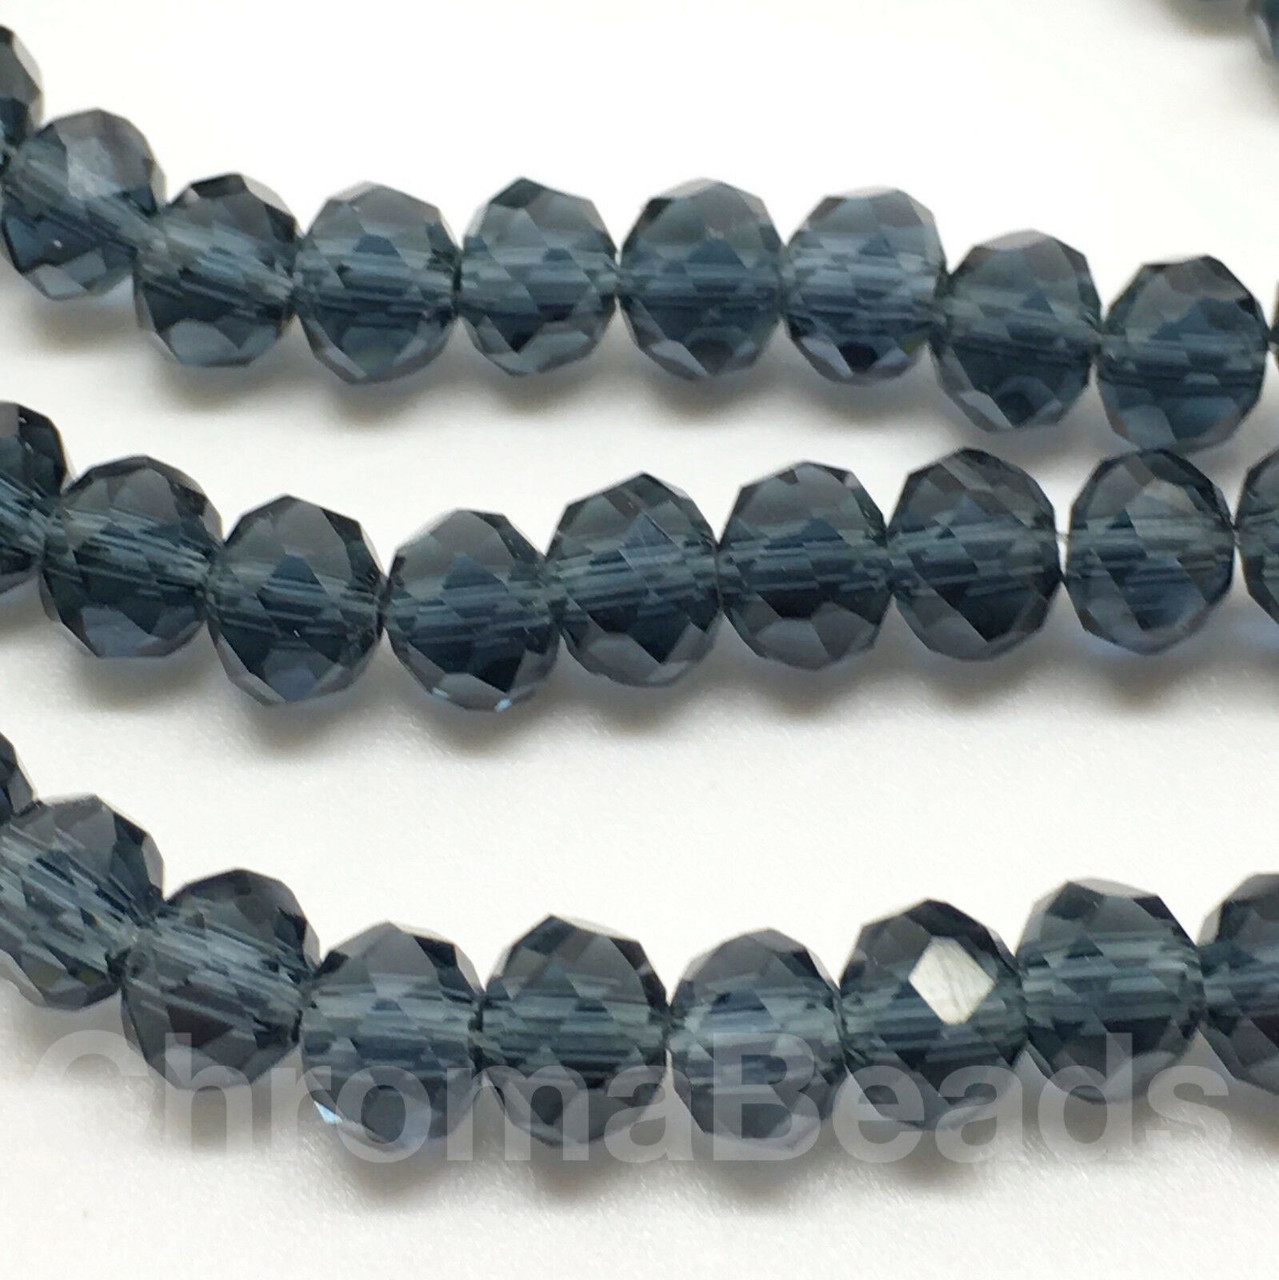 8x6mm Faceted Glass Rondelles - DARK GREY - approx 72 beads / 17 inch strand